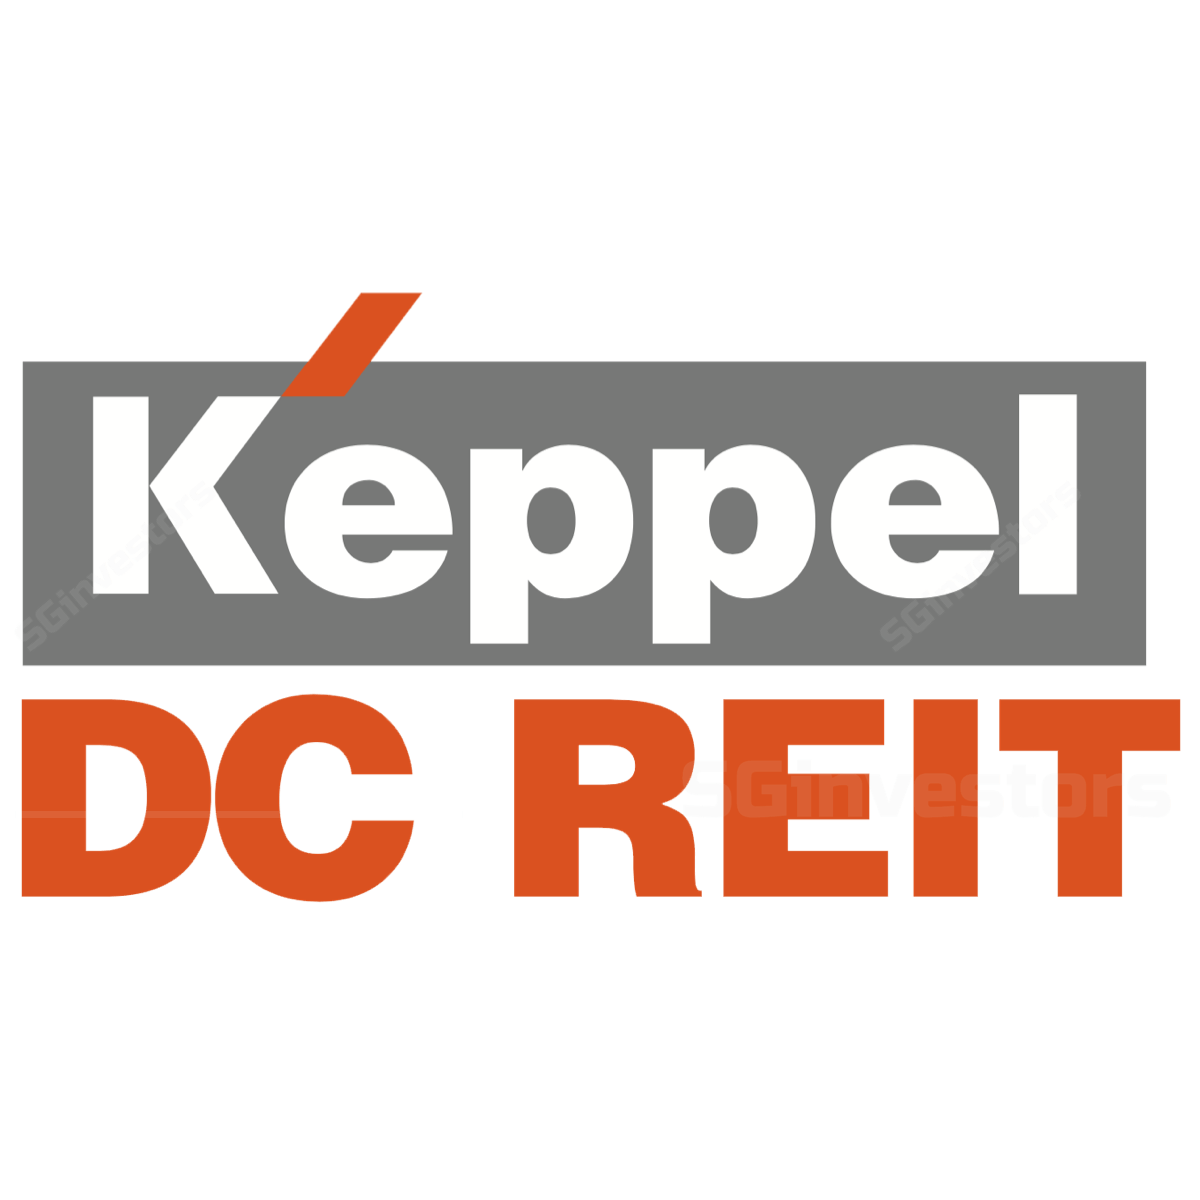 REIT Logo - things you should know about Keppel DC REIT